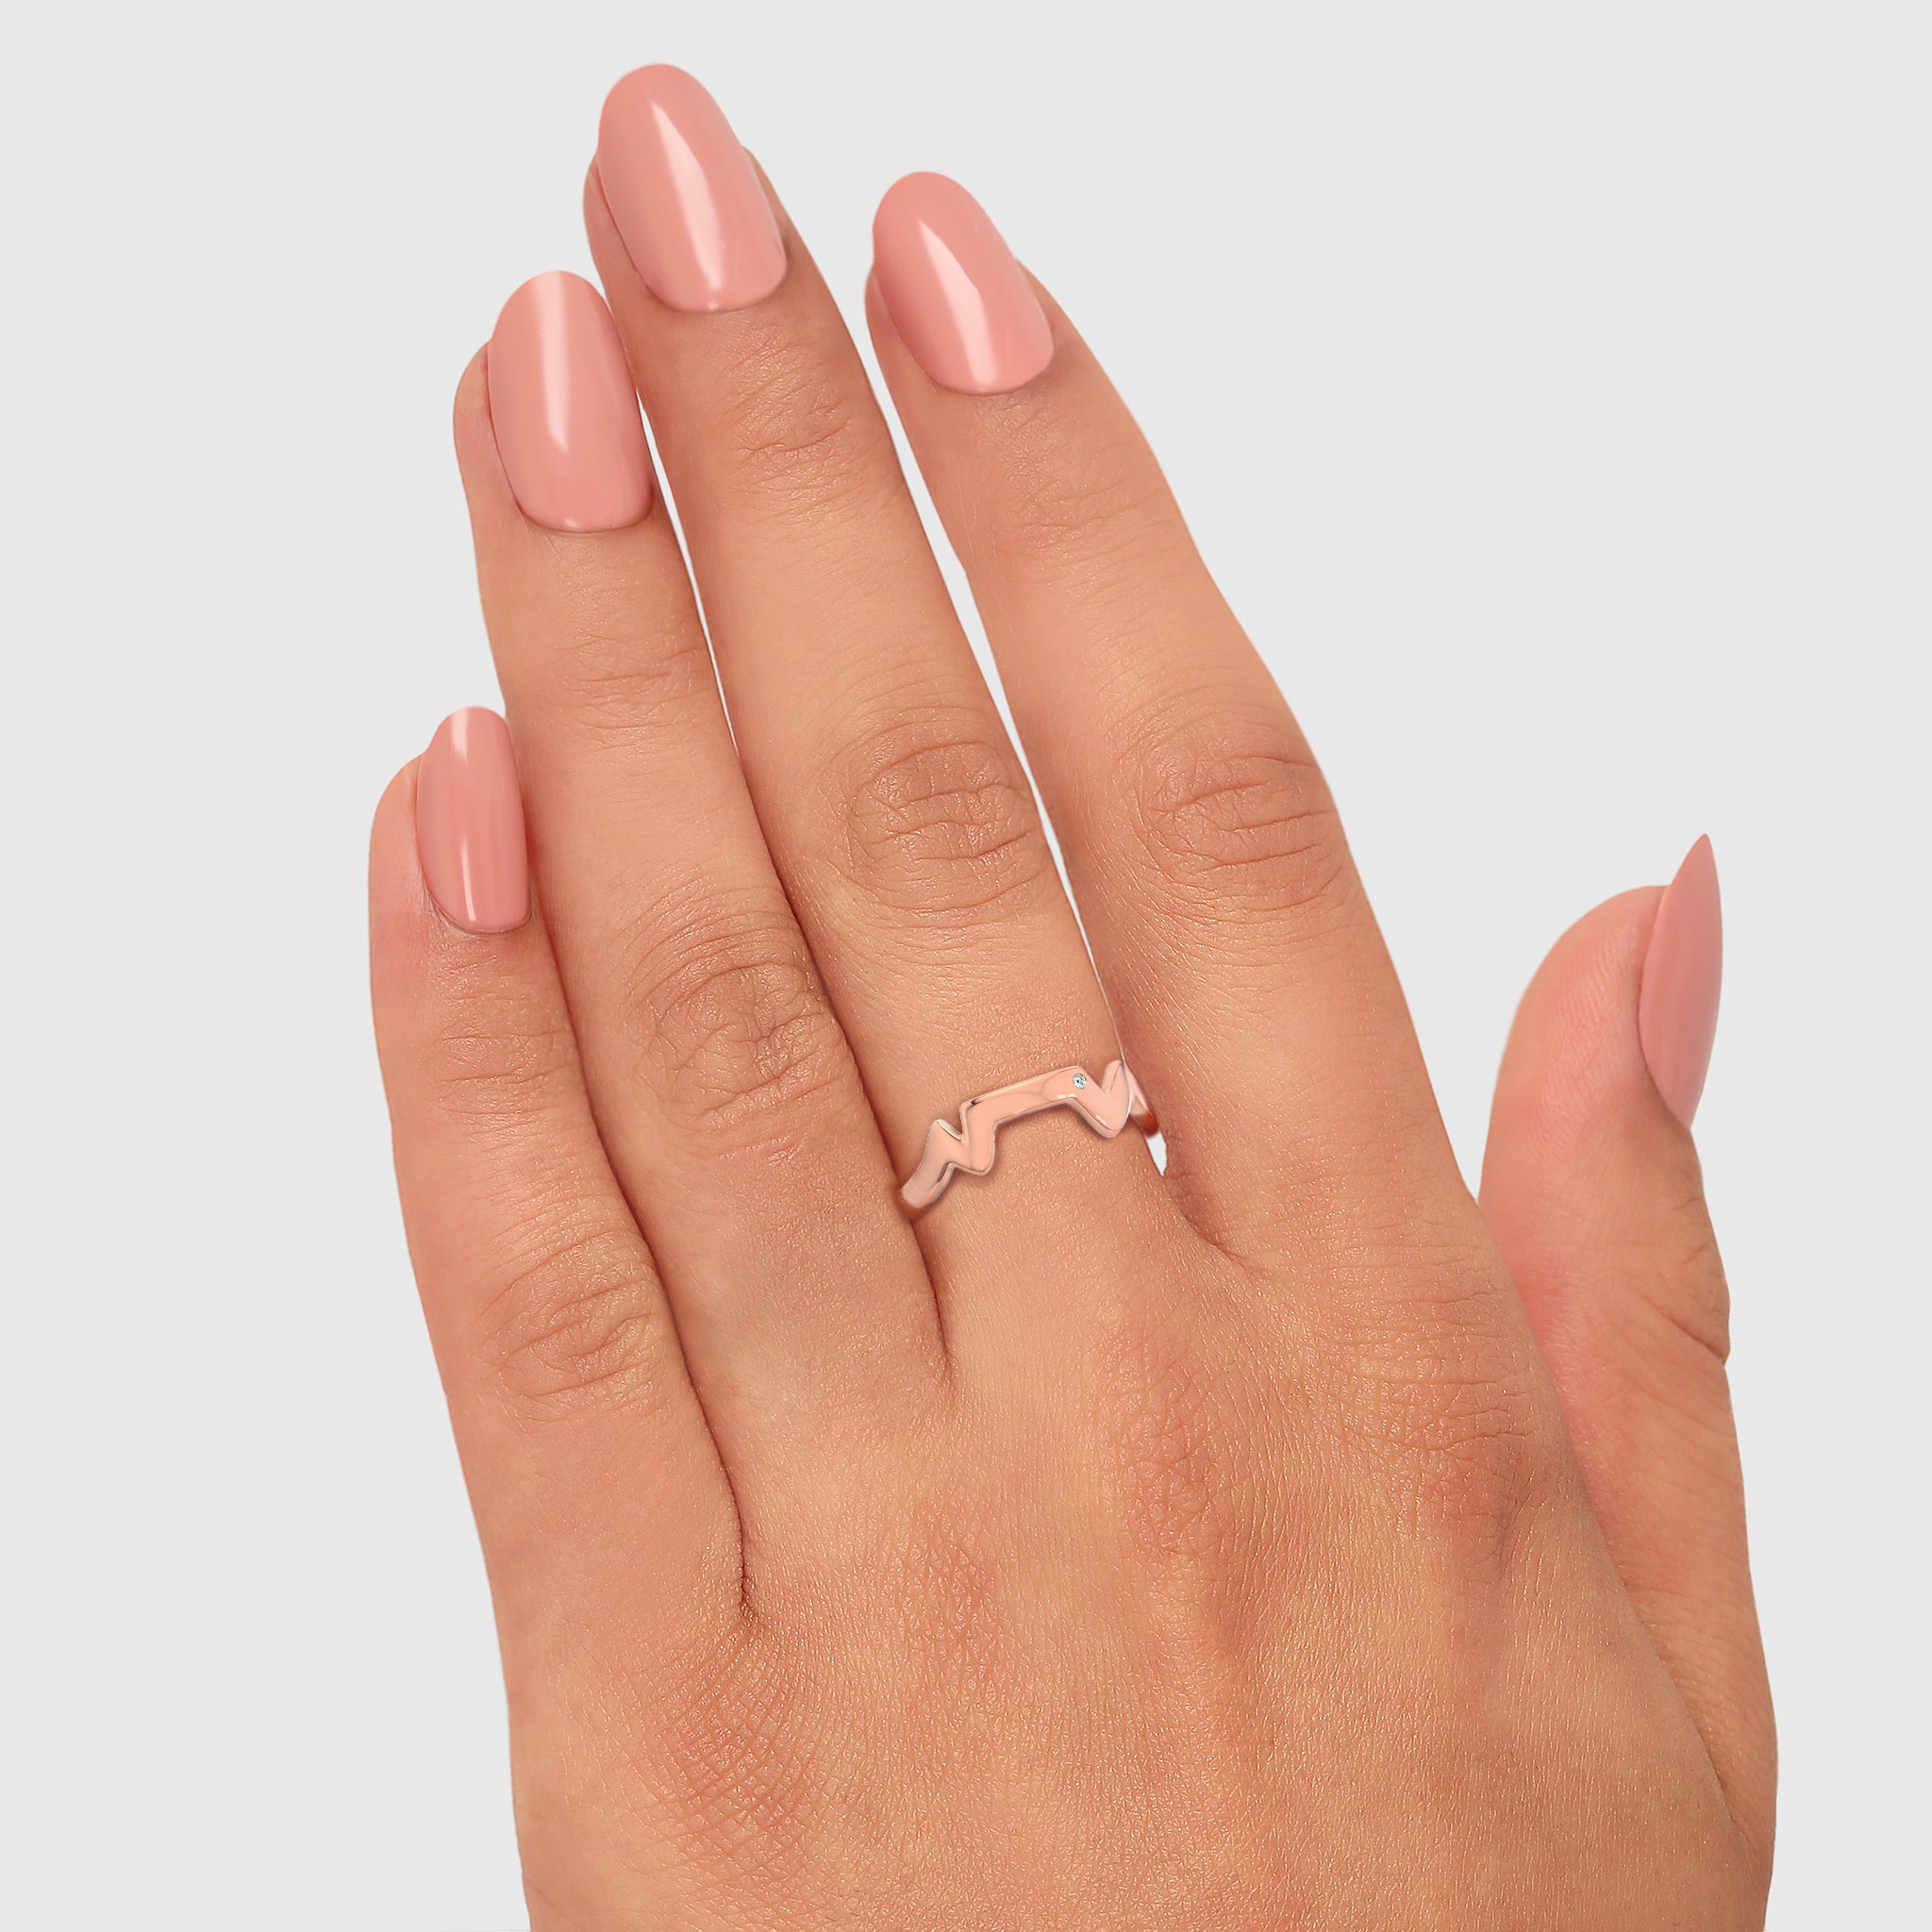 Shimansky - Women Wearing the Table Mountain Single Diamond Ring Crafted in 14K Rose Gold